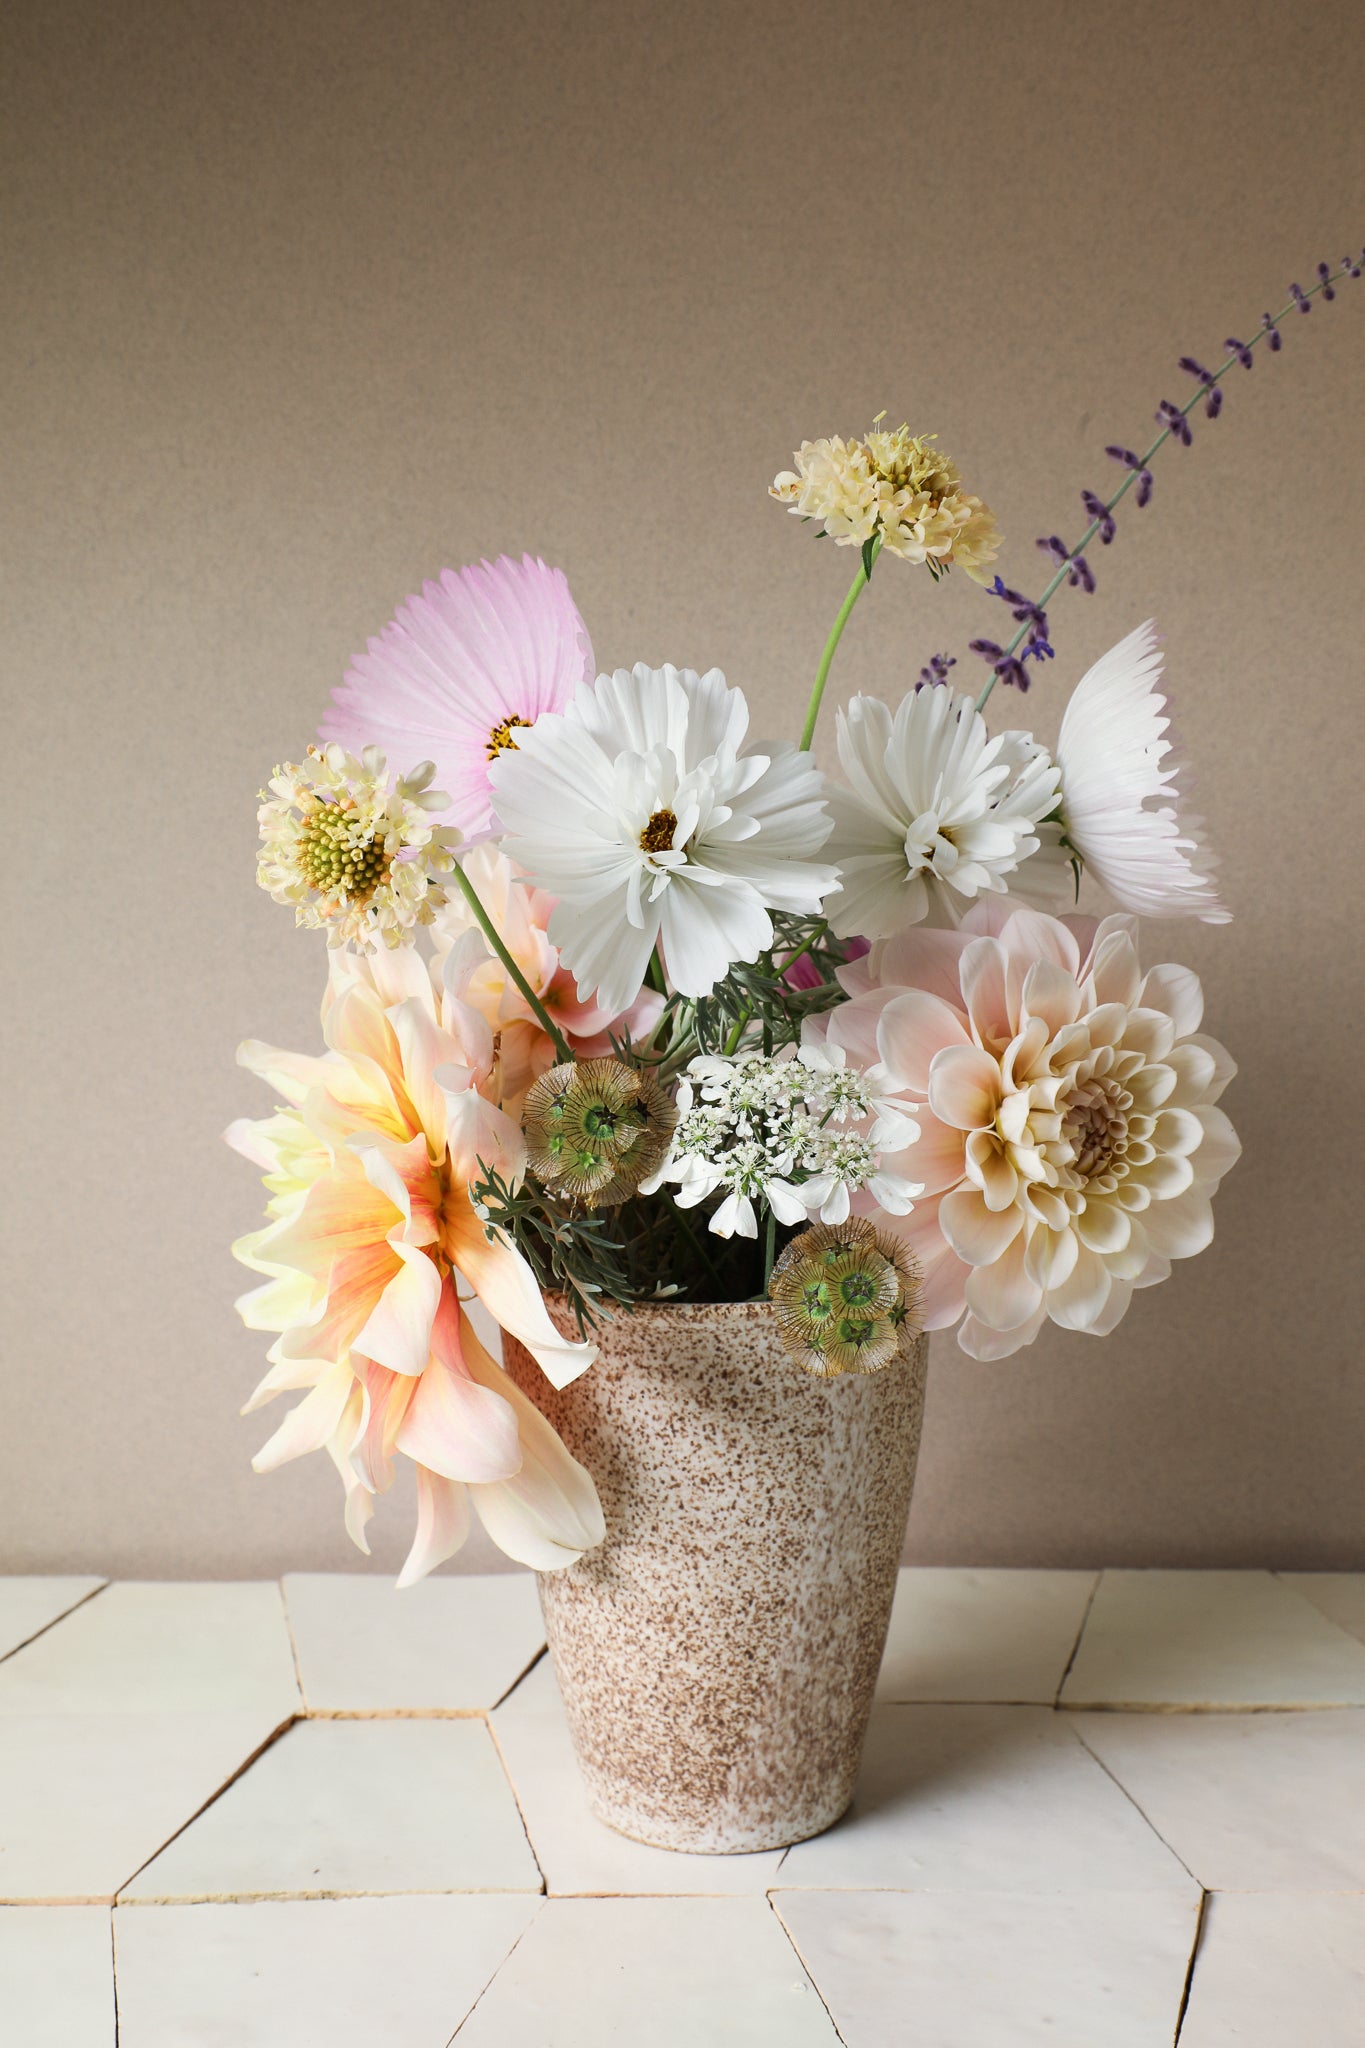 Speckled vase holding a collection of dahlia & cosmos flowers